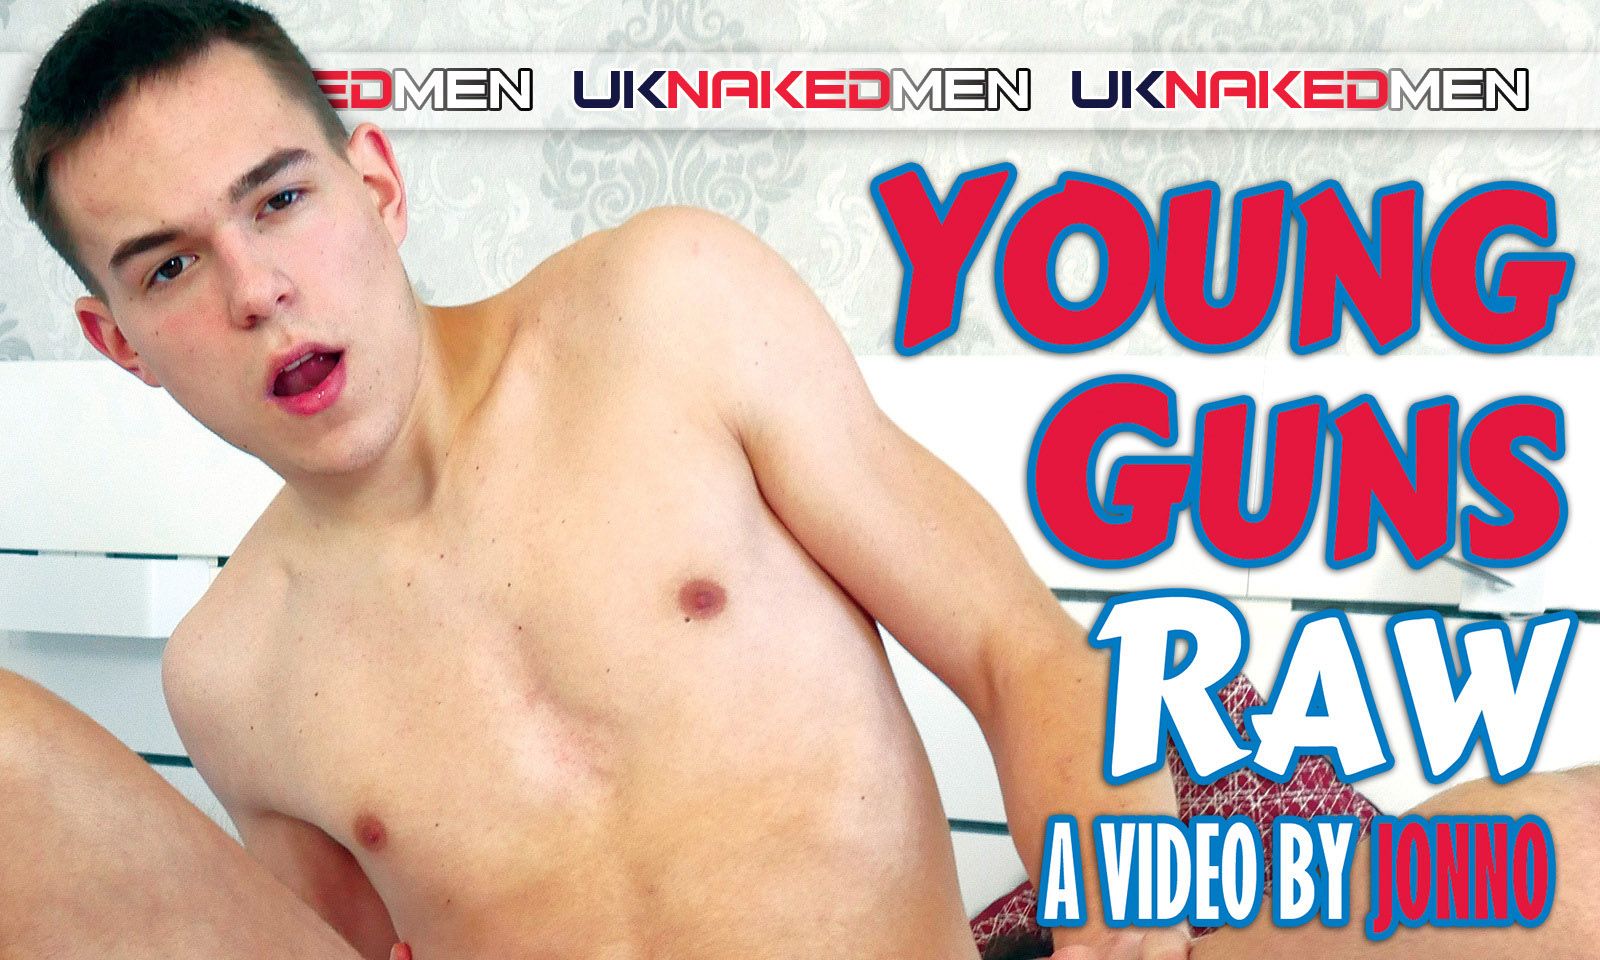 UK Naked Men Releases Bareback Feature ‘Young Guns Raw’